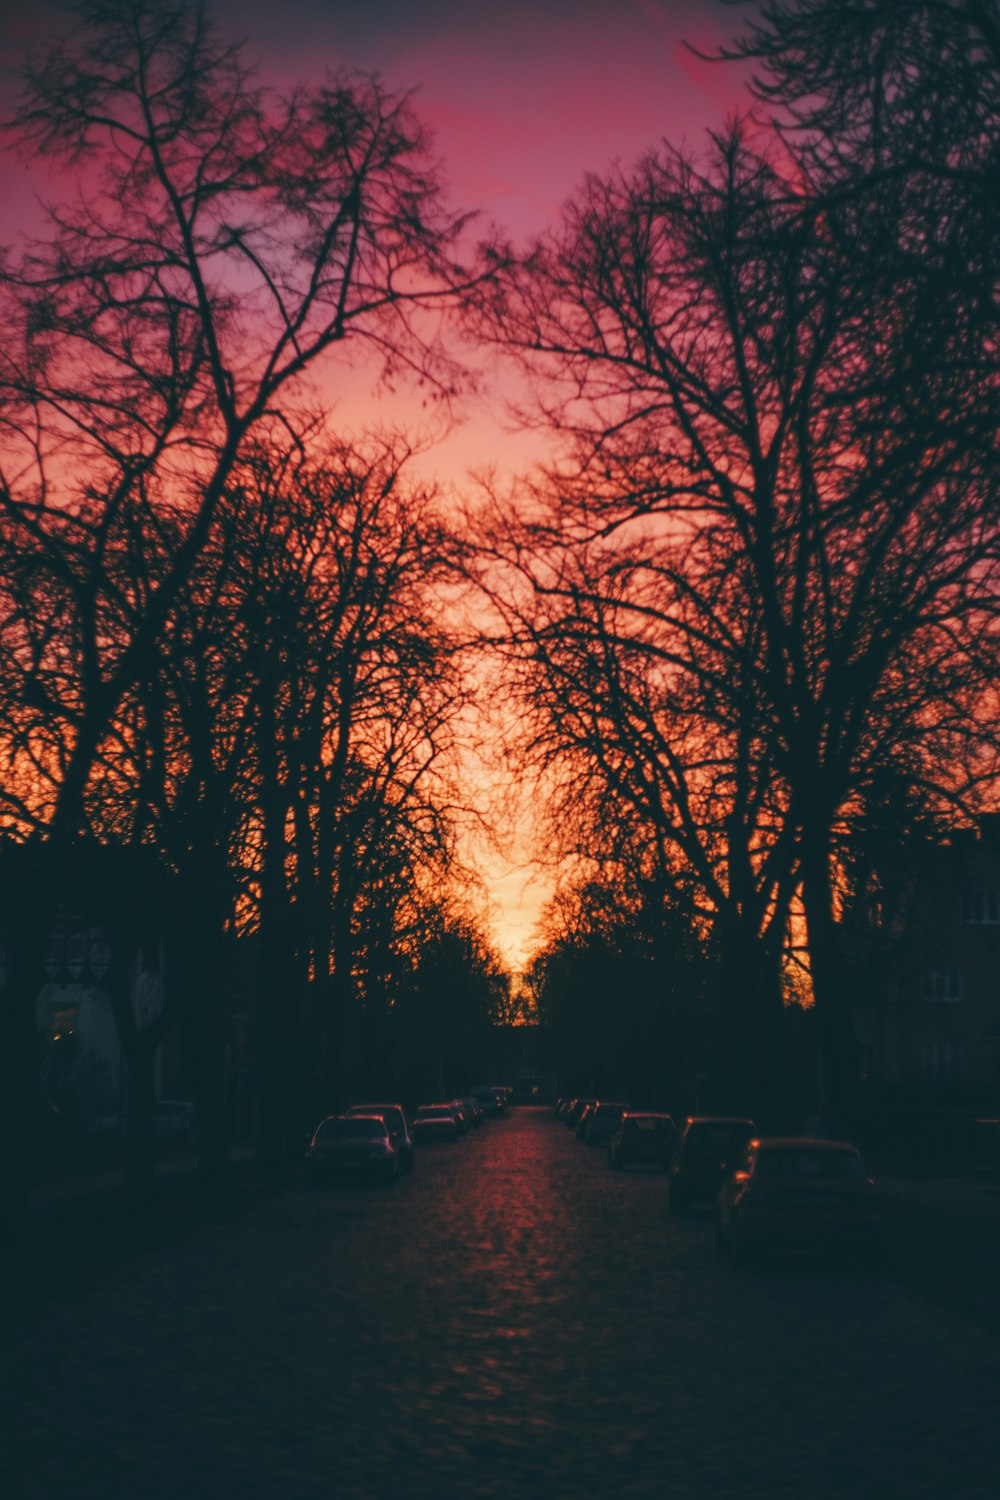 the sun is setting over a street lined with trees